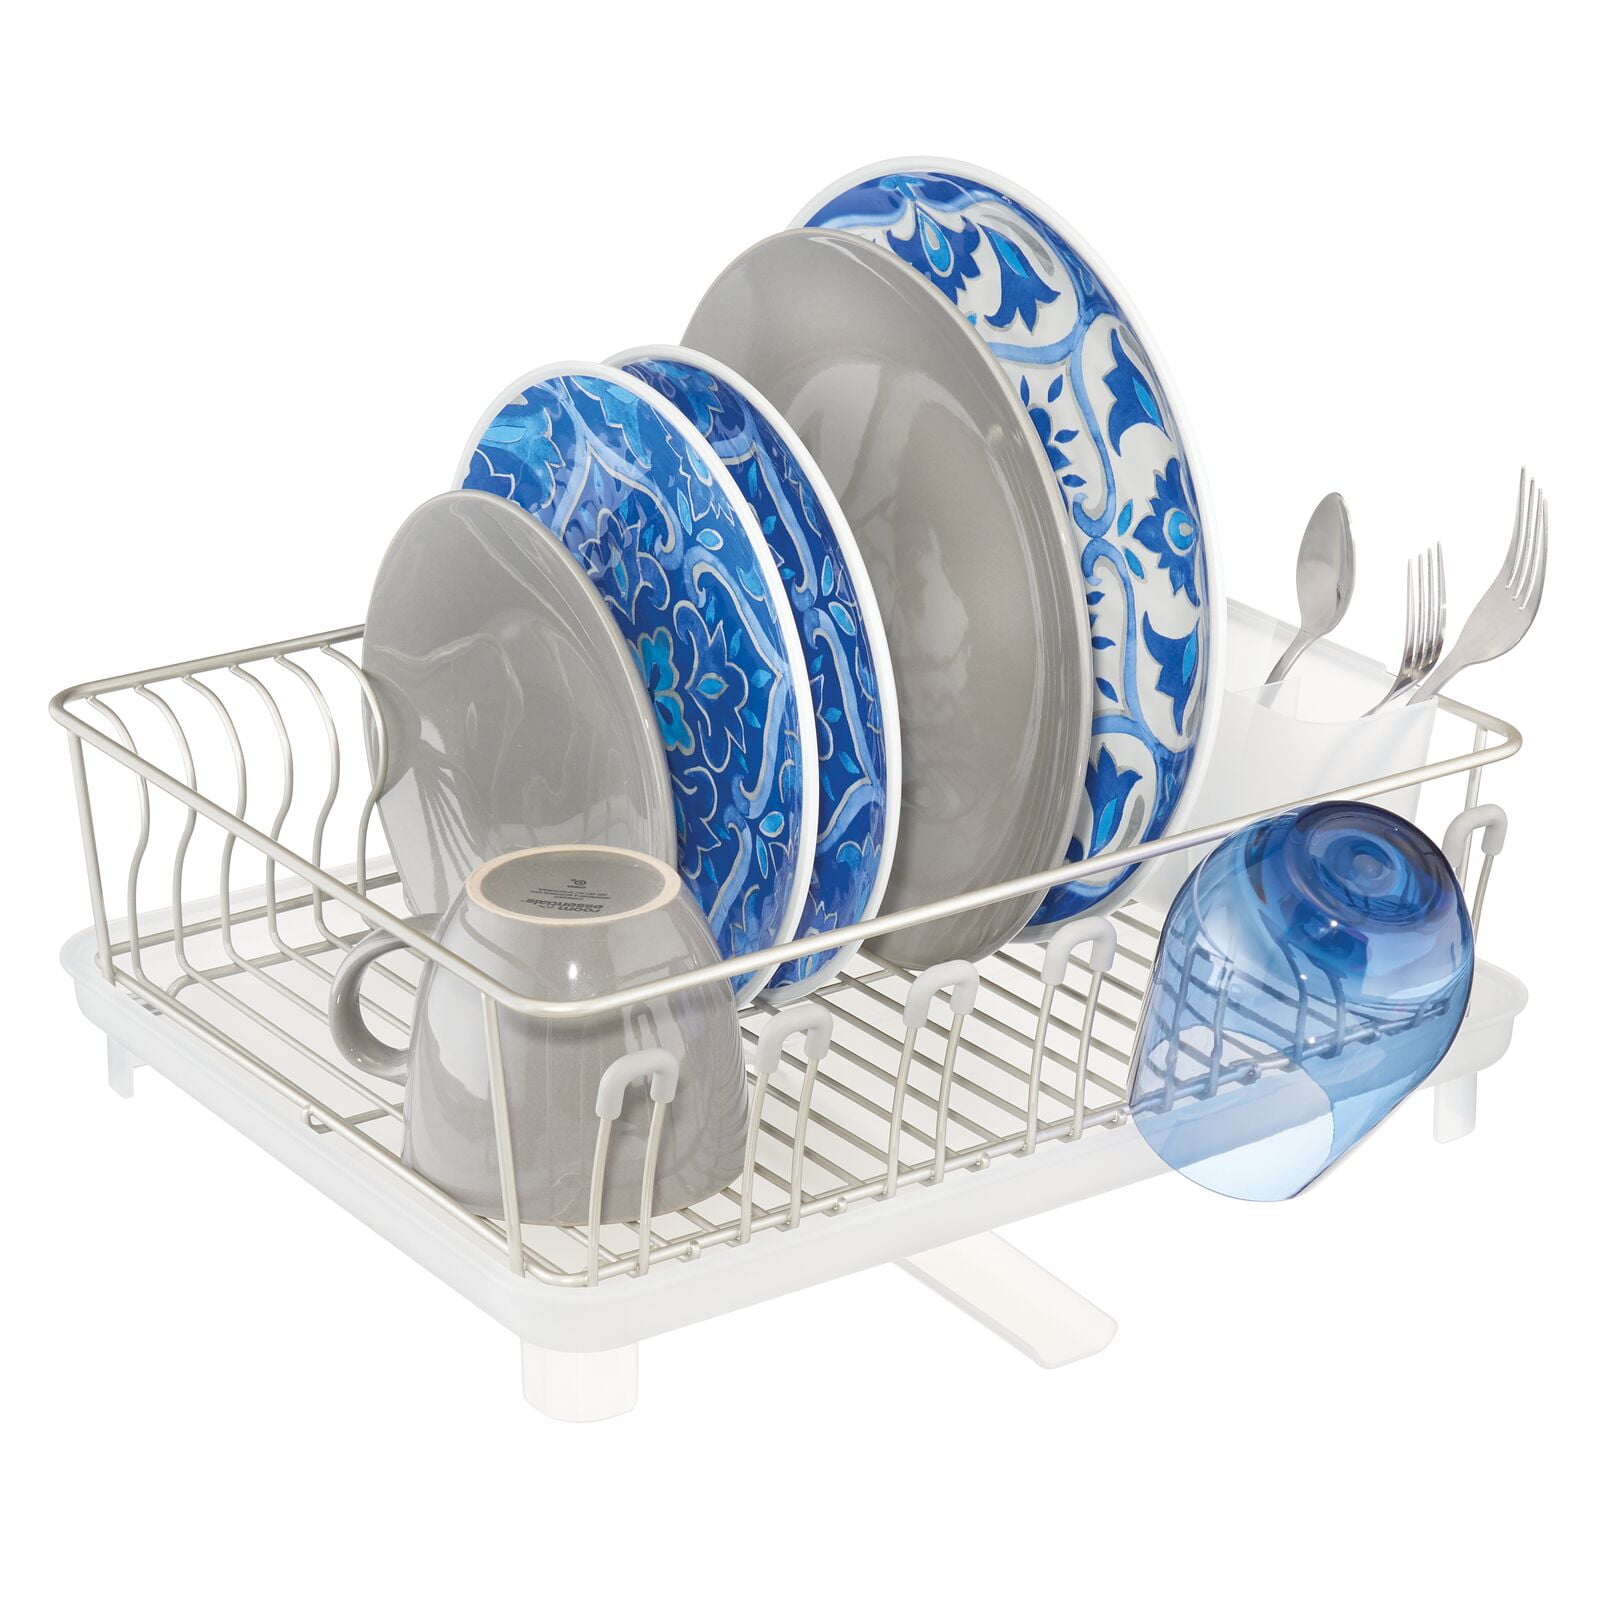 Buy Wholesale QI003574 Stainless Steel Dish Rack with Plastic